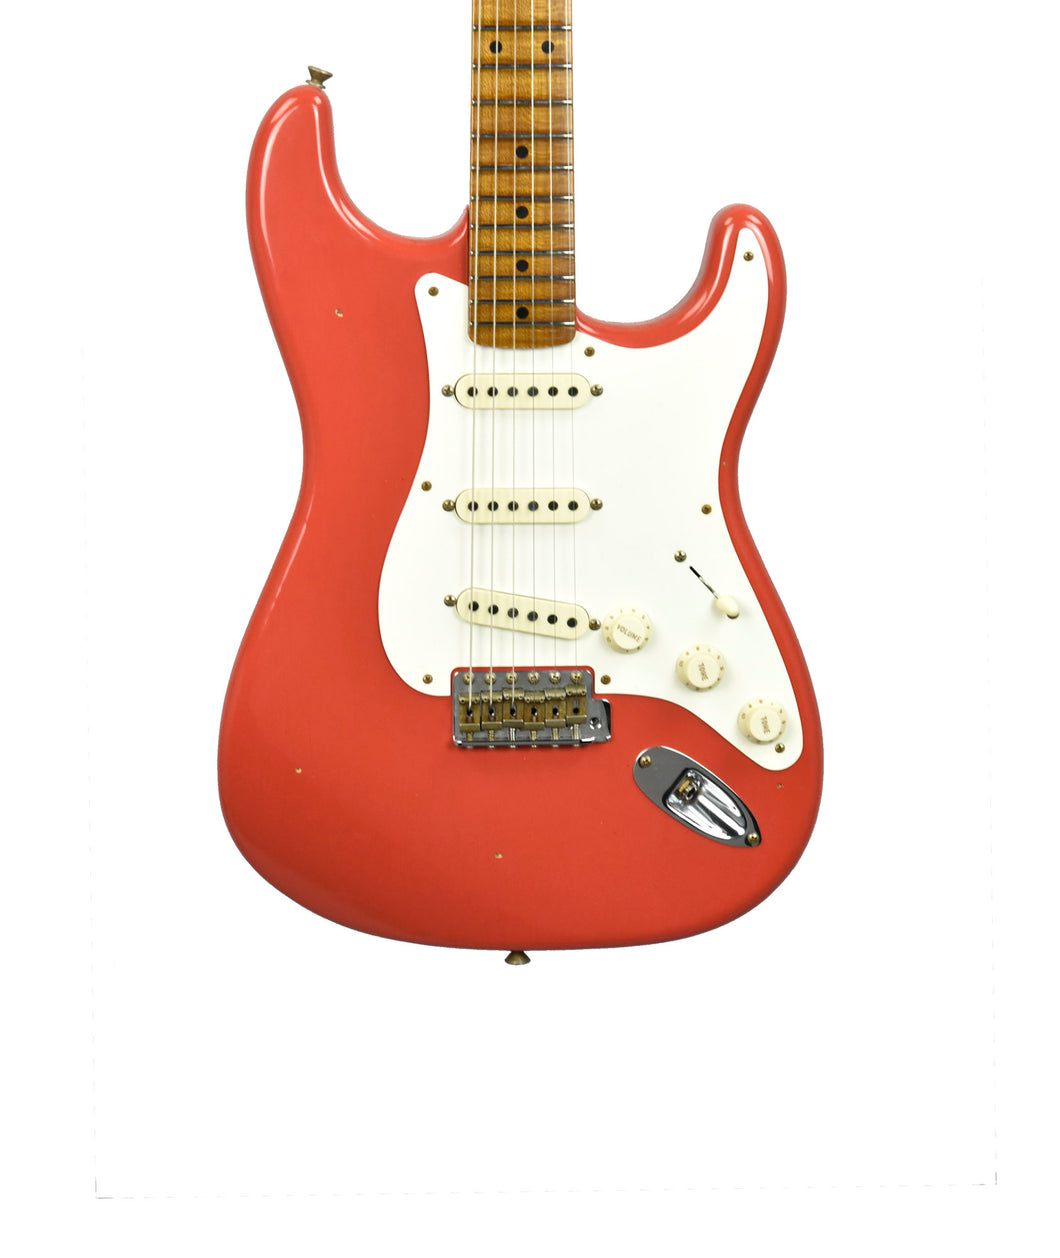 Fender Custom Shop 55 Stratocaster Journeyman Relic in Aged Fiesta Red R127742 - The Music Gallery